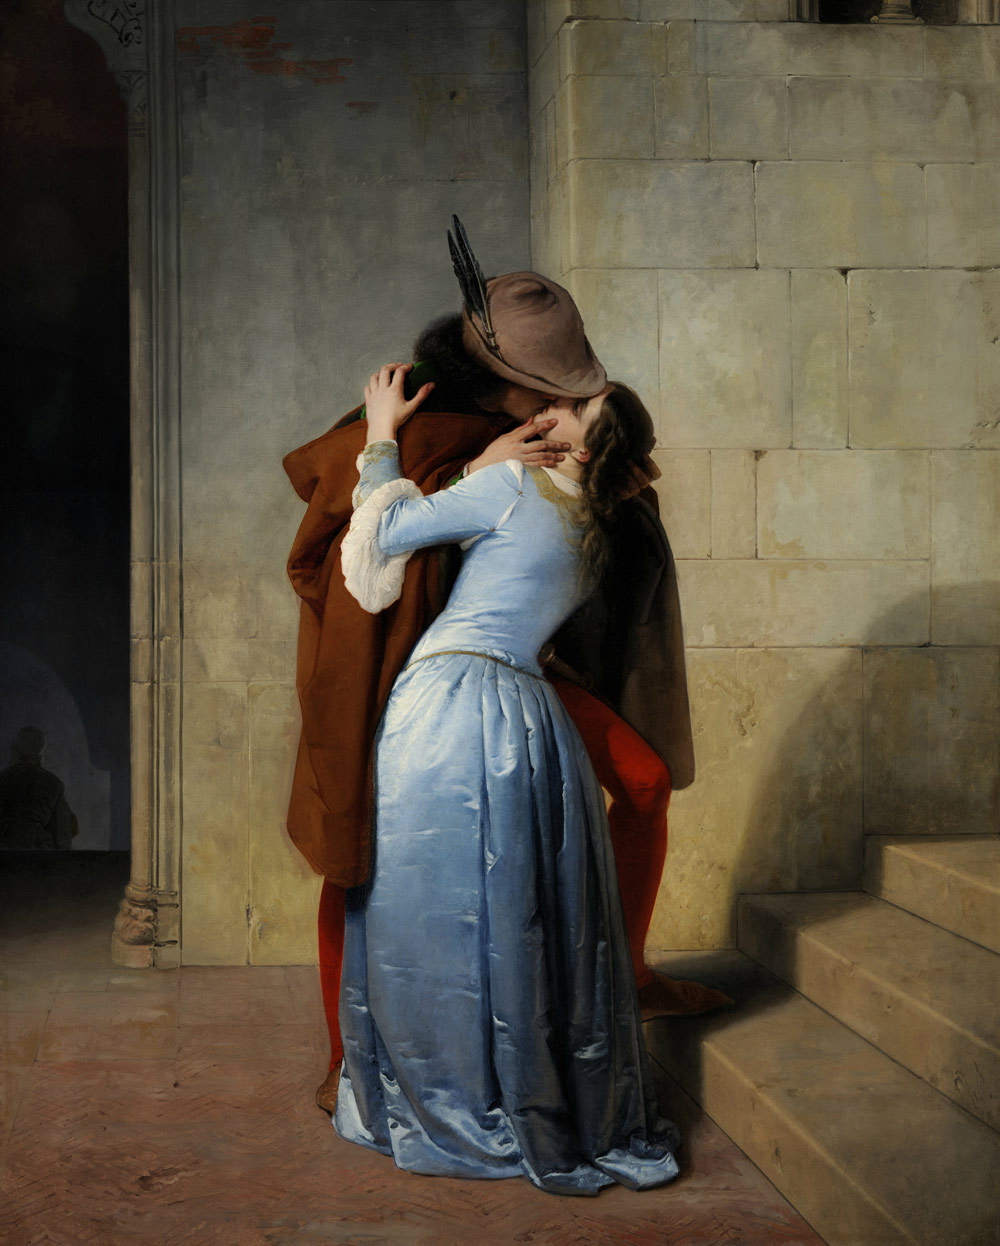 Francesco Hayez, life and works of the great painter of Italian Romanticism